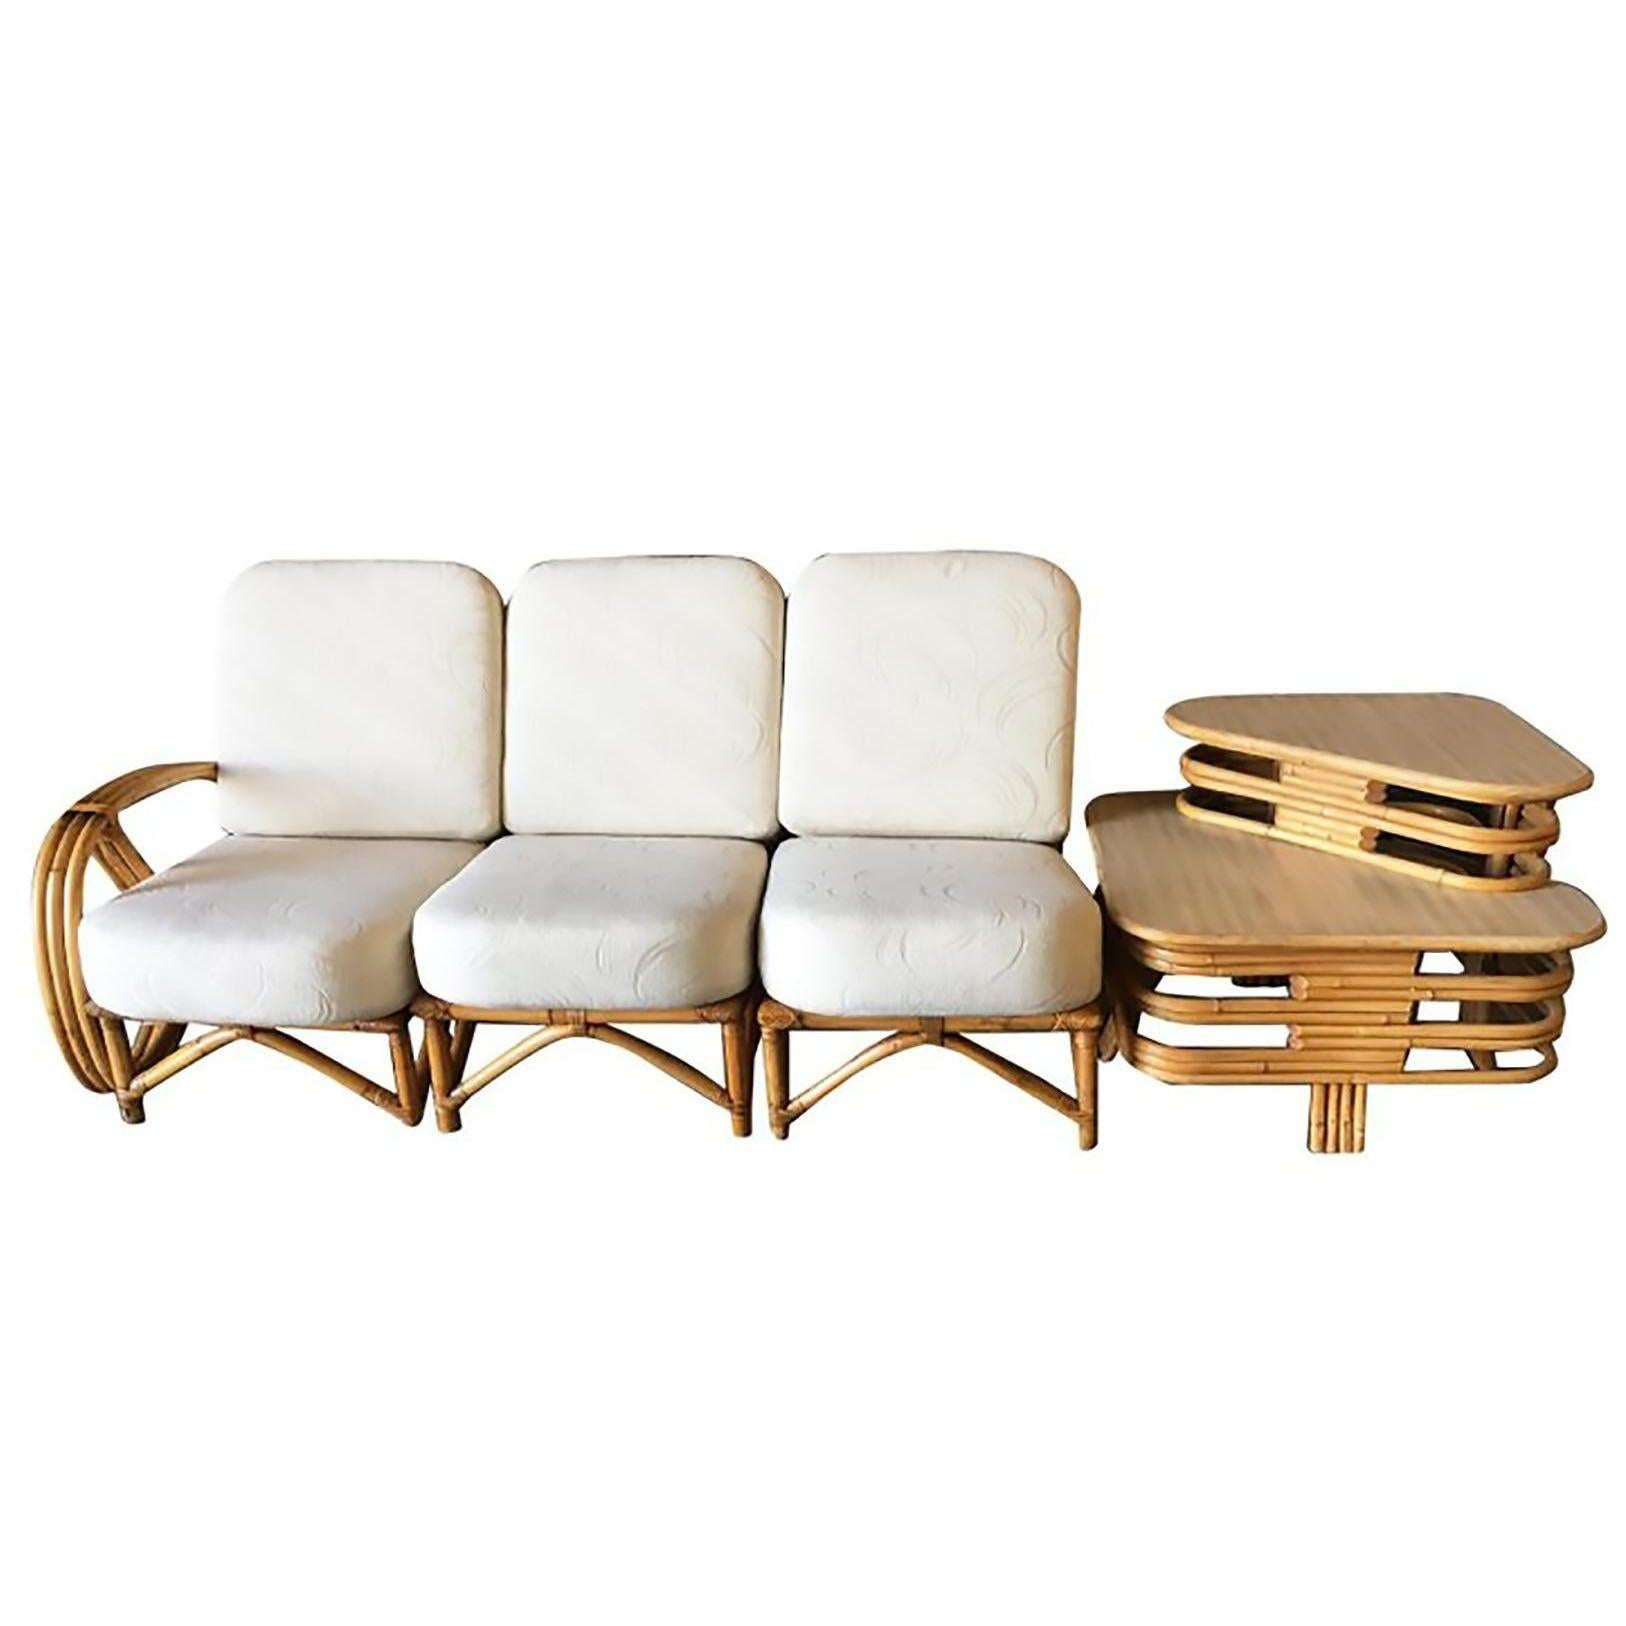 This rare find is a 3-strand 3/4 pretzel arm rattan 3-seat sectional sofa paired with a spacious 2-tier side table, seamlessly fitting on the armless side of the sofa. Its distinctive Mid-century design boasts unique wicker wrappings and an elegant